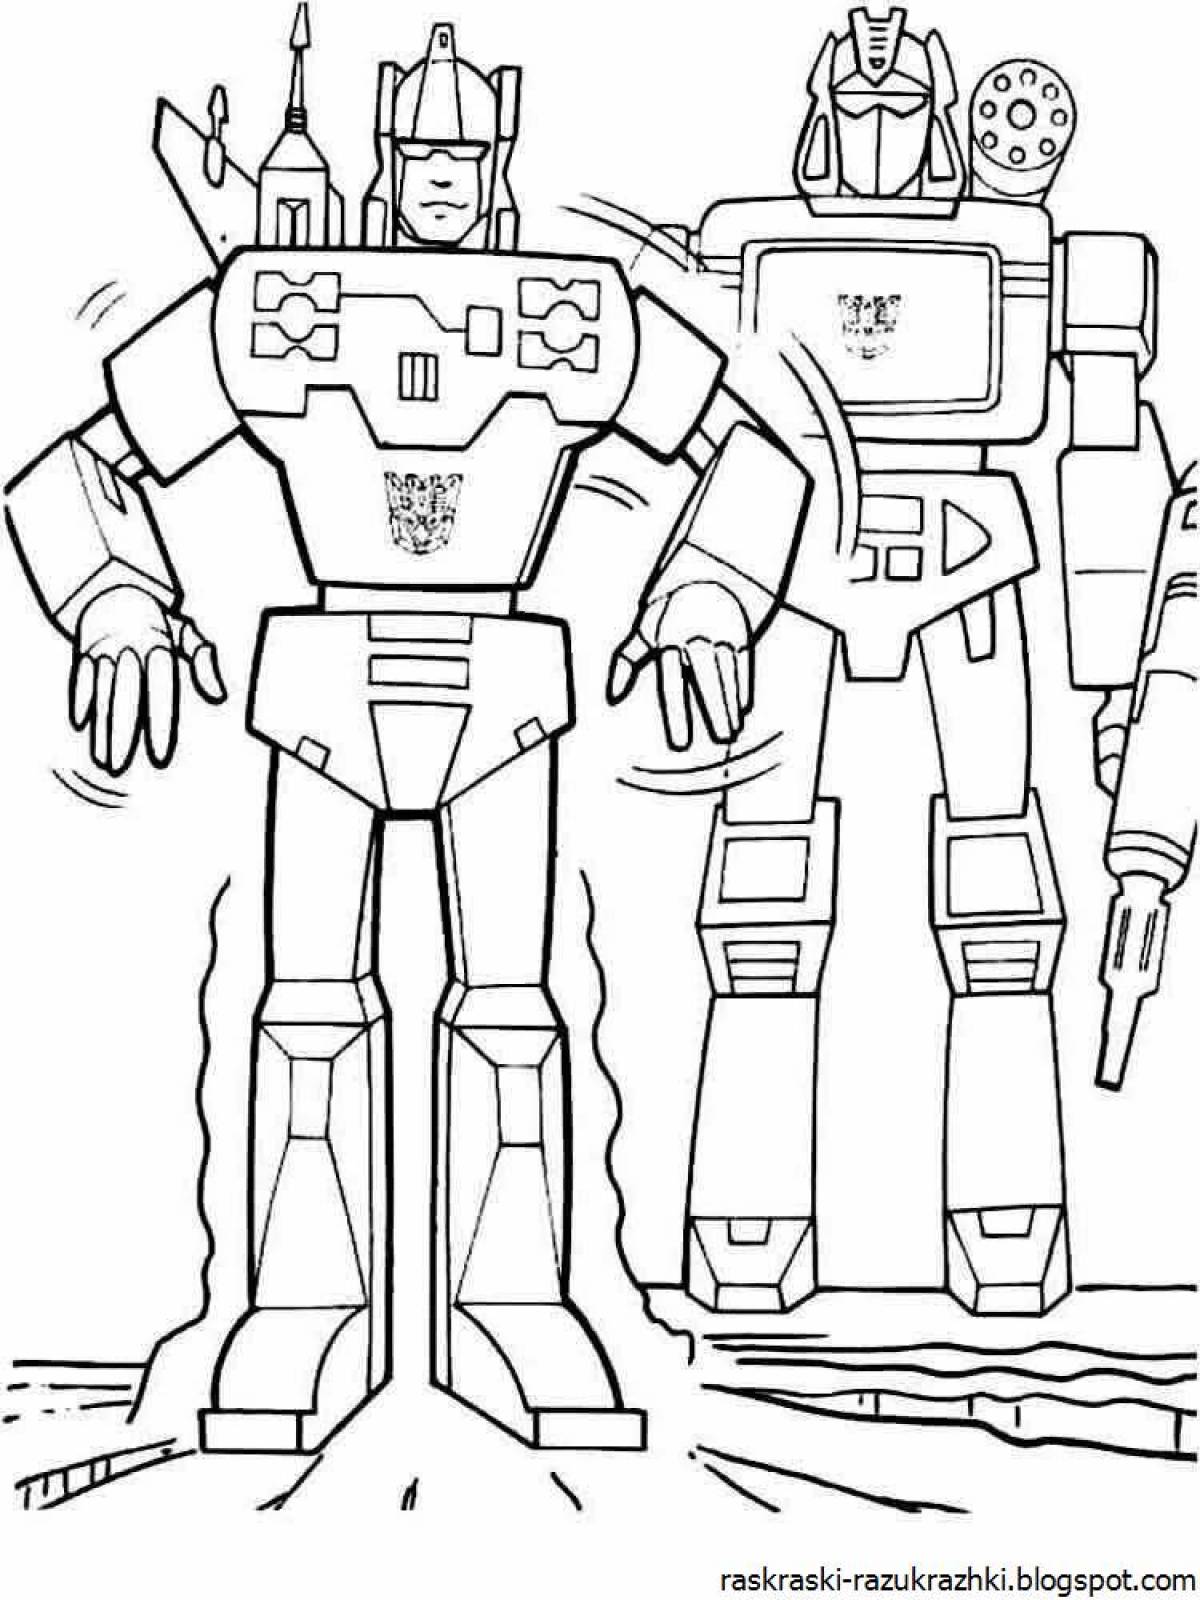 Crazy color robot coloring pages for boys